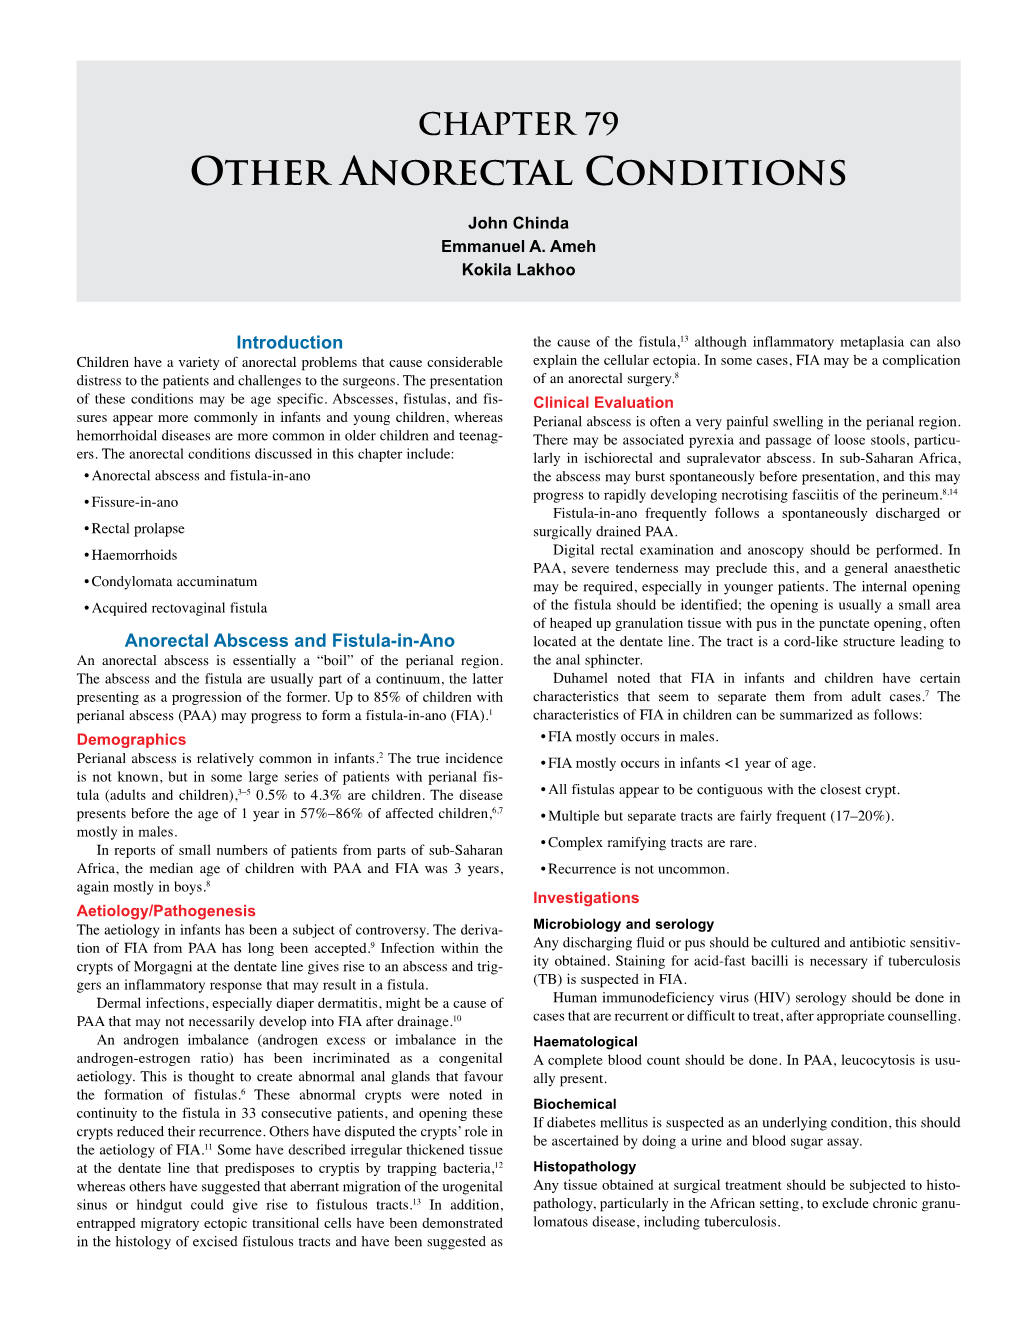 79. Other Anorectal Conditions